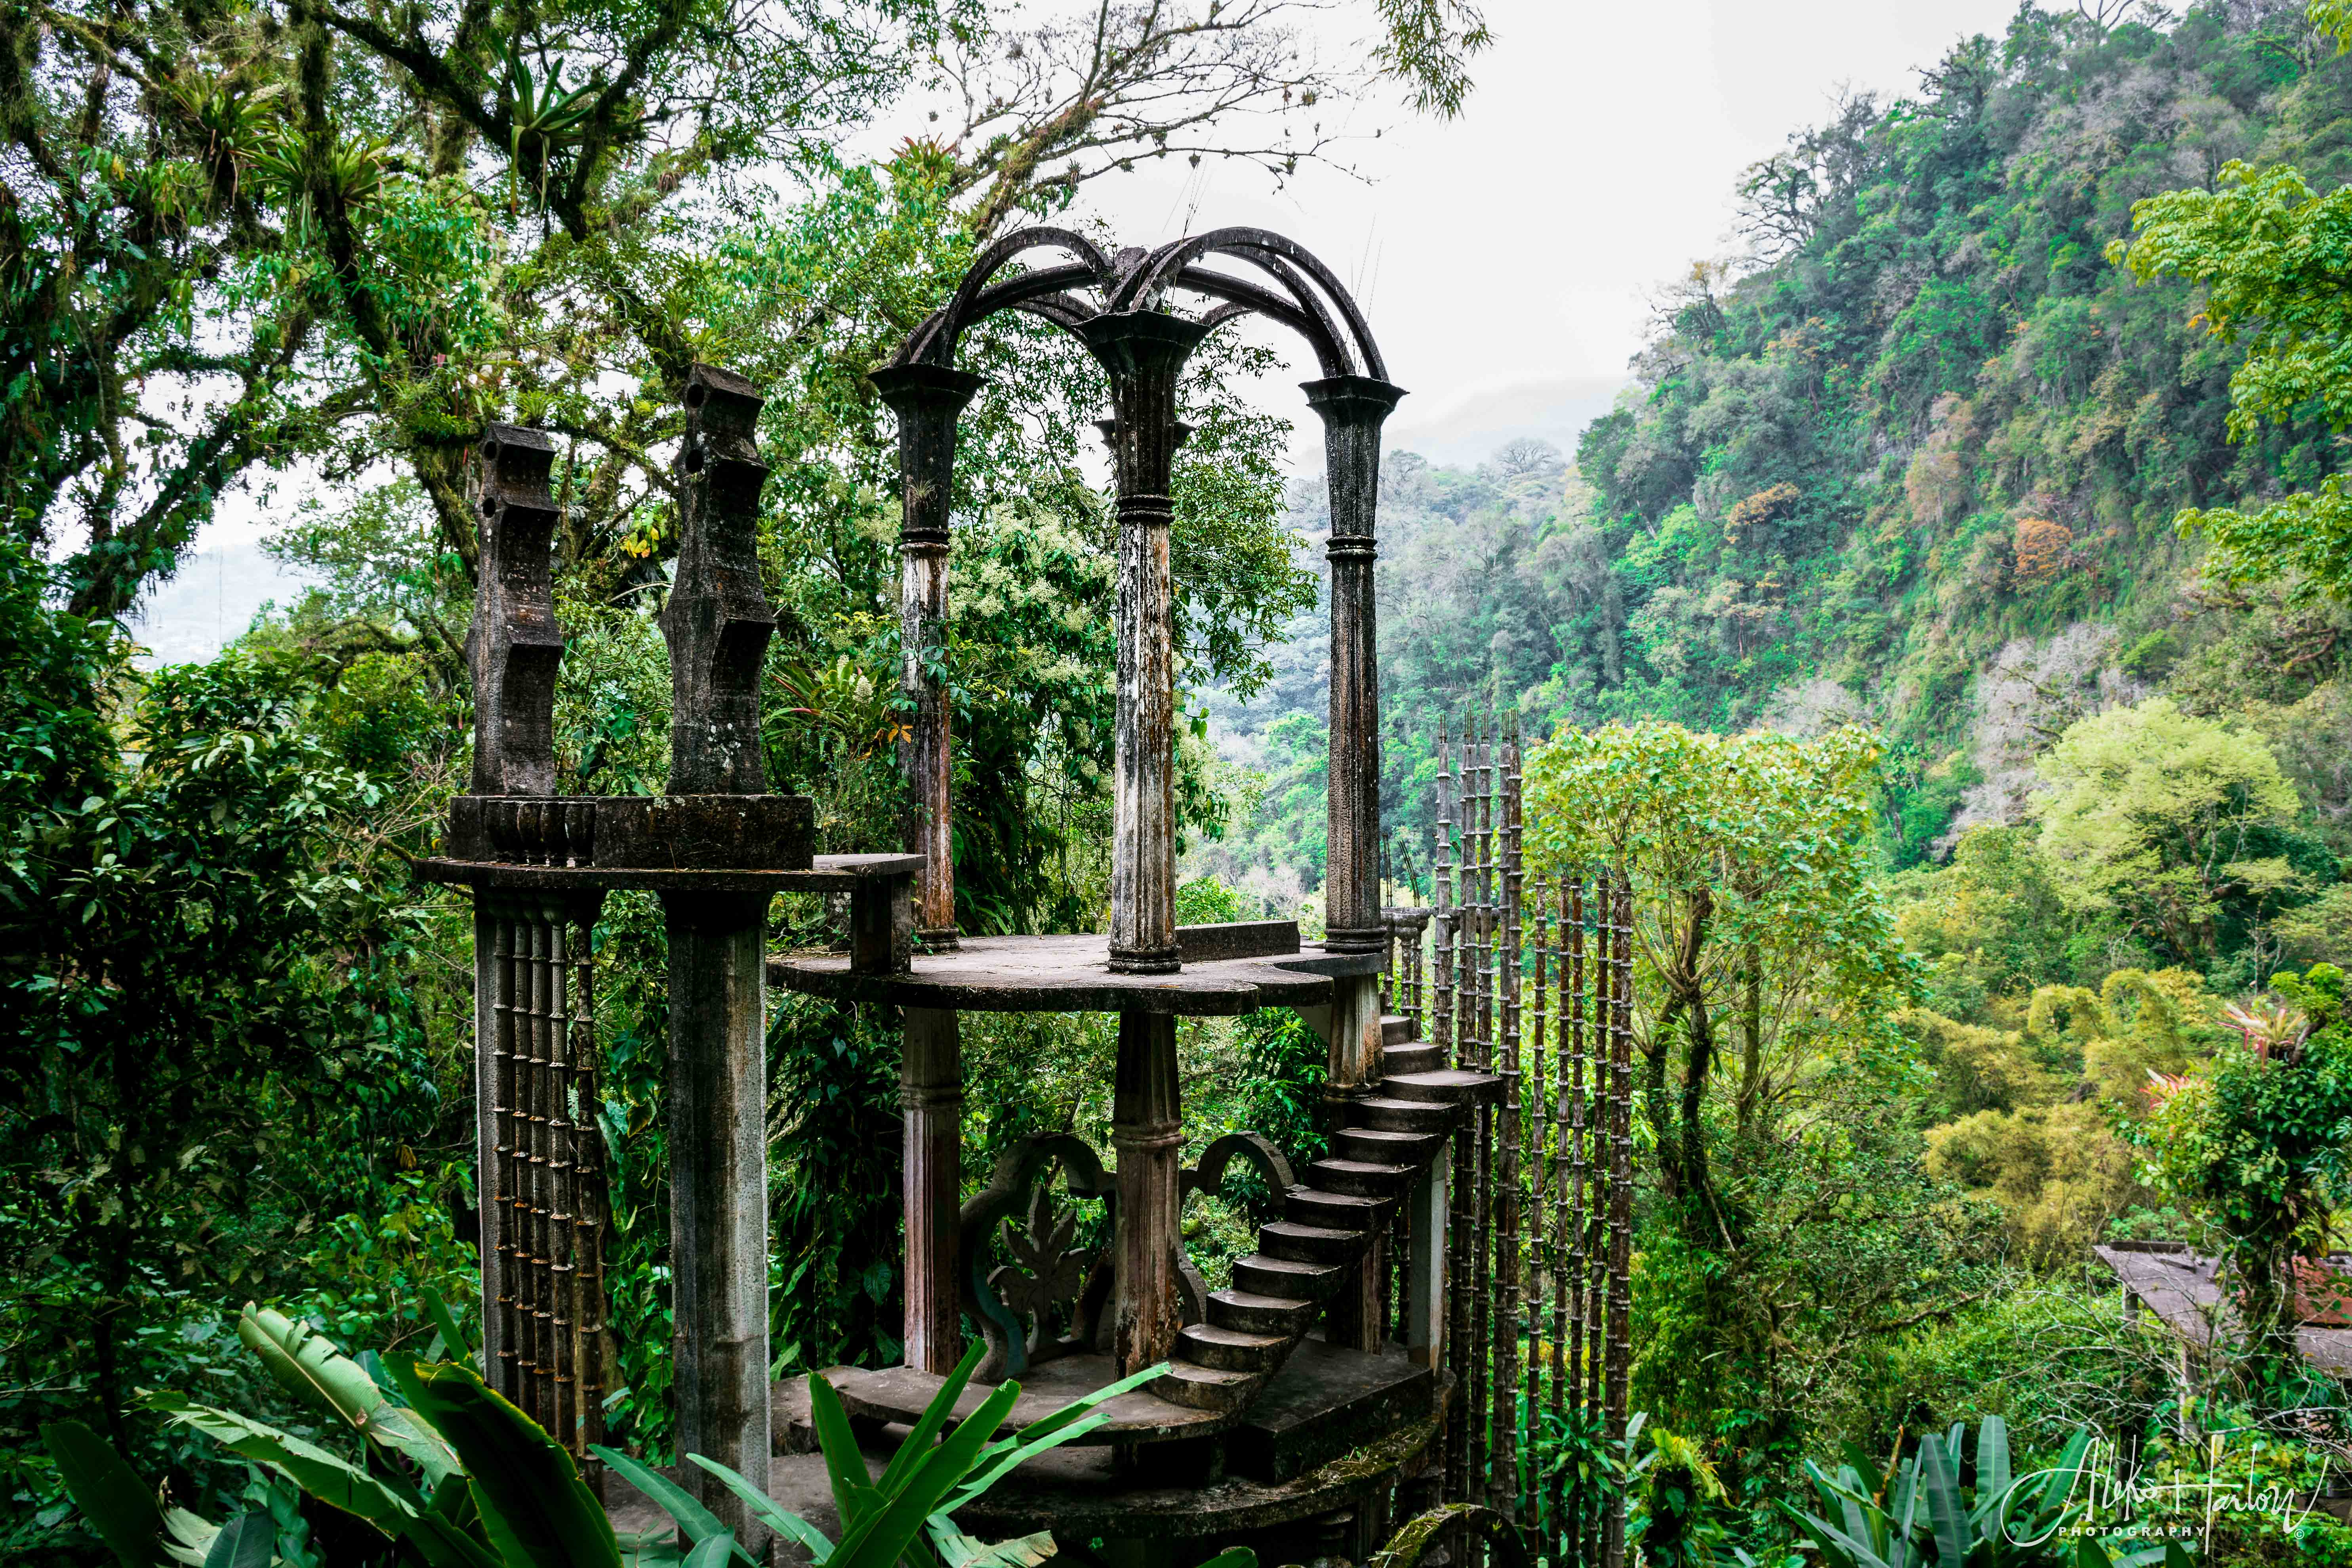 The second day we entered to the jungle, to find a magical place that has been used for some films, since it seems to be a place of interest for its architecture, sculpture and all the surrounding nature. The place is called Surrealist Garden by Edward James.